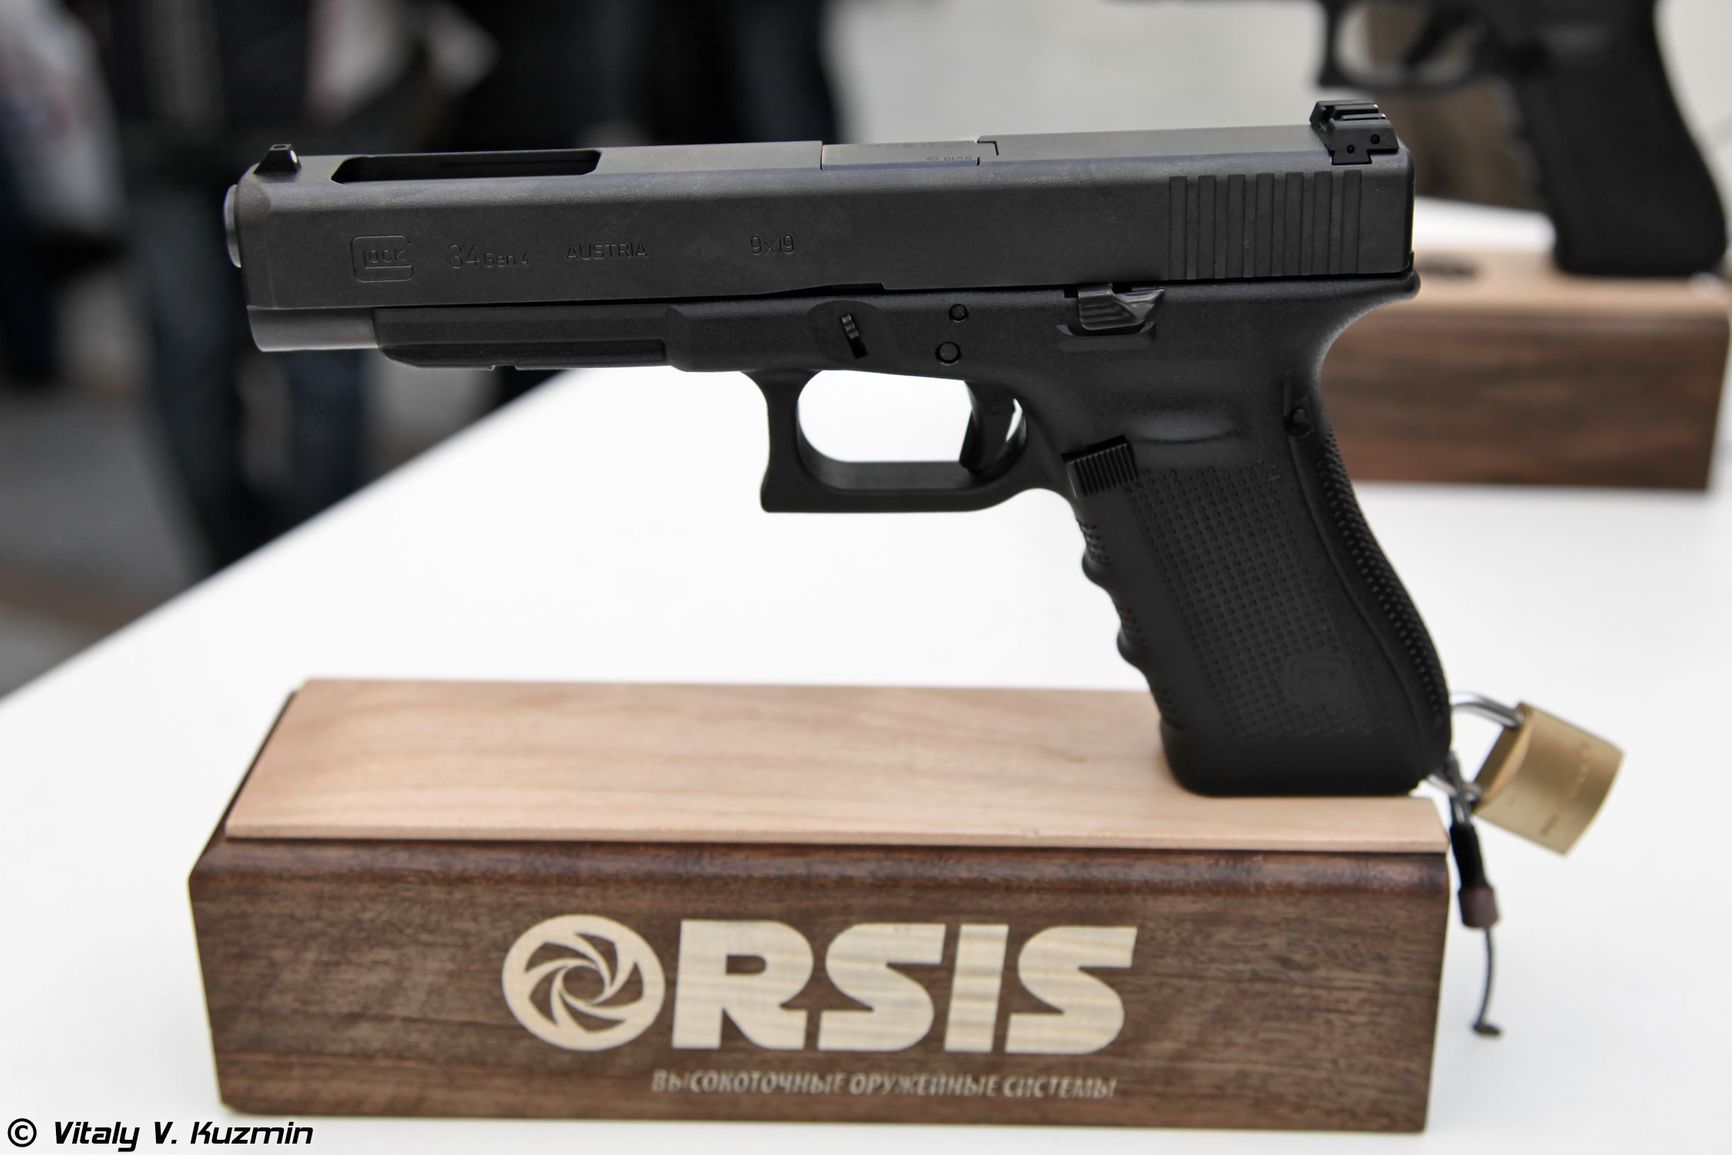 A Promtechnologia-produced Glock pistol on display at an arms exhibition in 2012